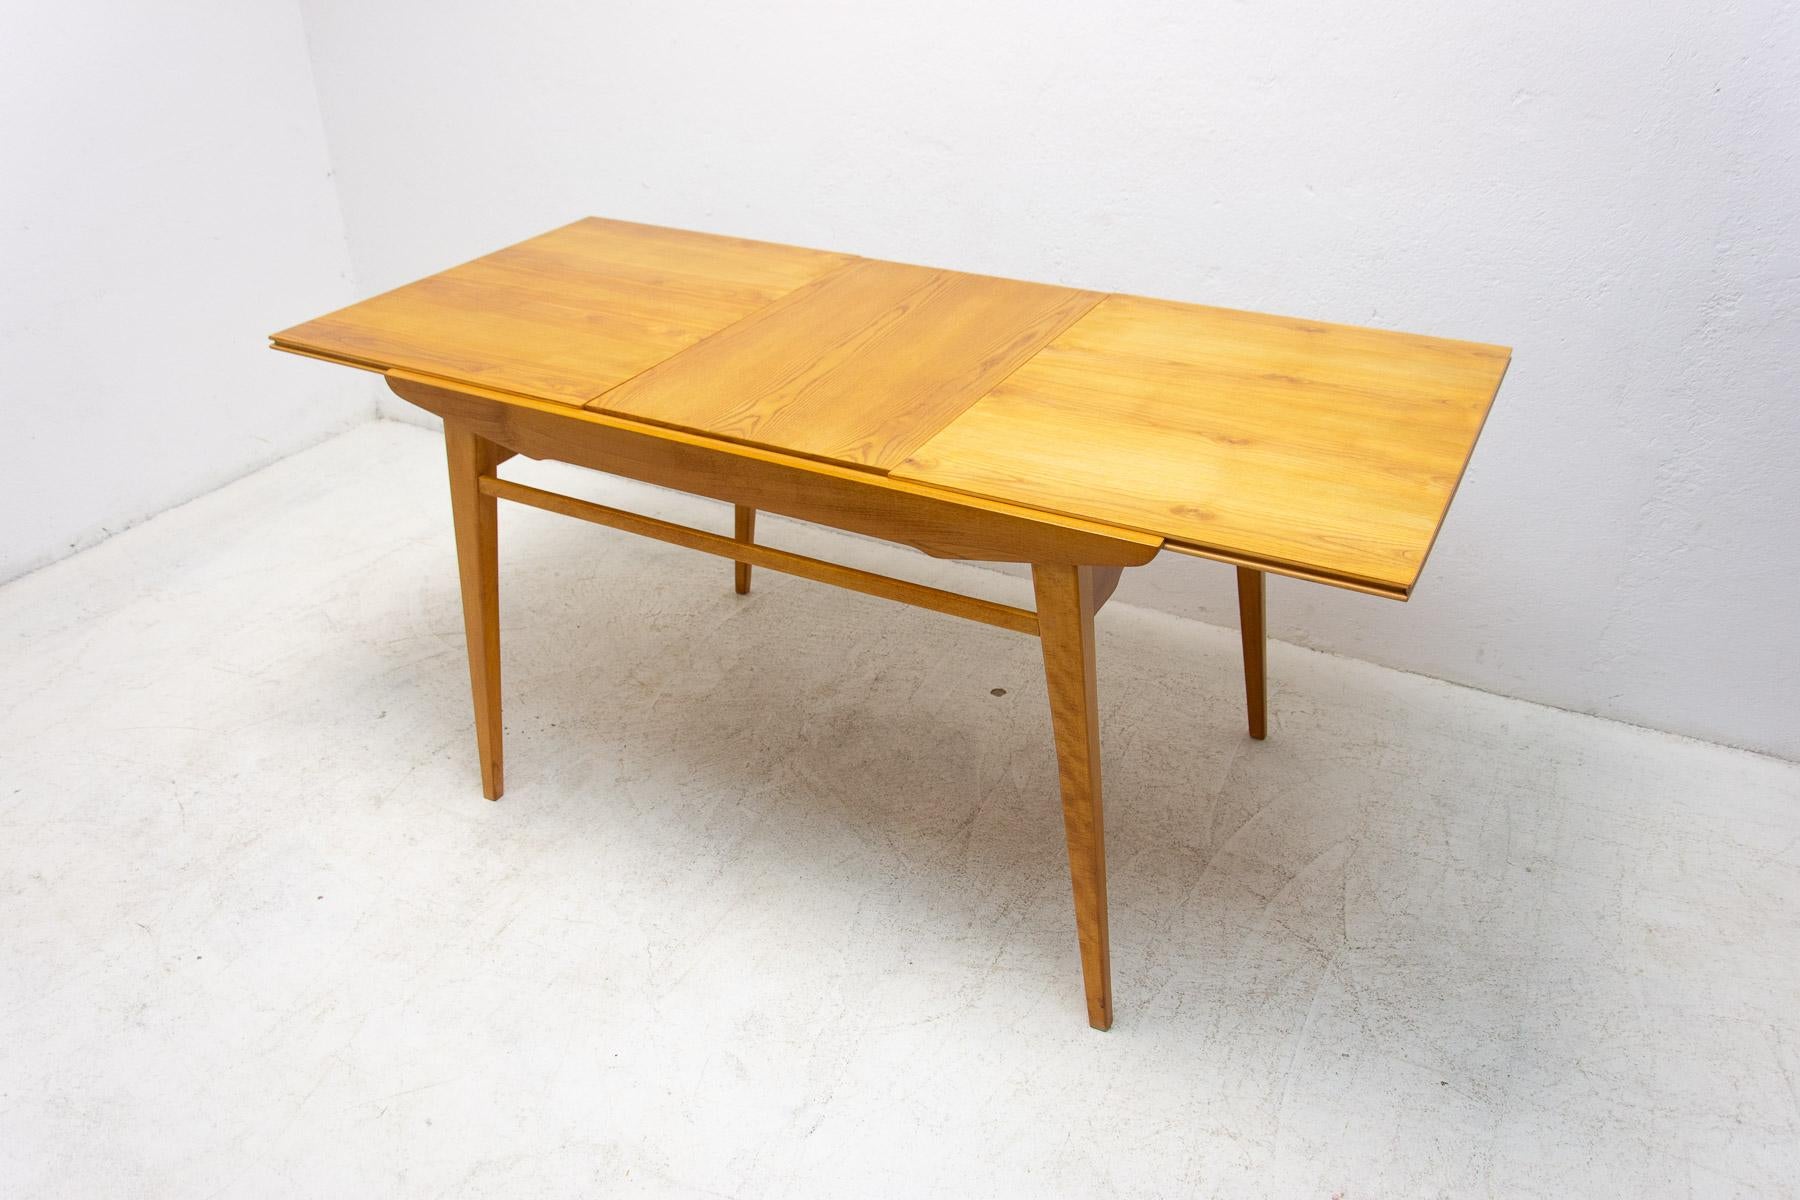 Midcentury Folding Dining Table by Bohumil Landsman for Jitona, 1970s For Sale 7